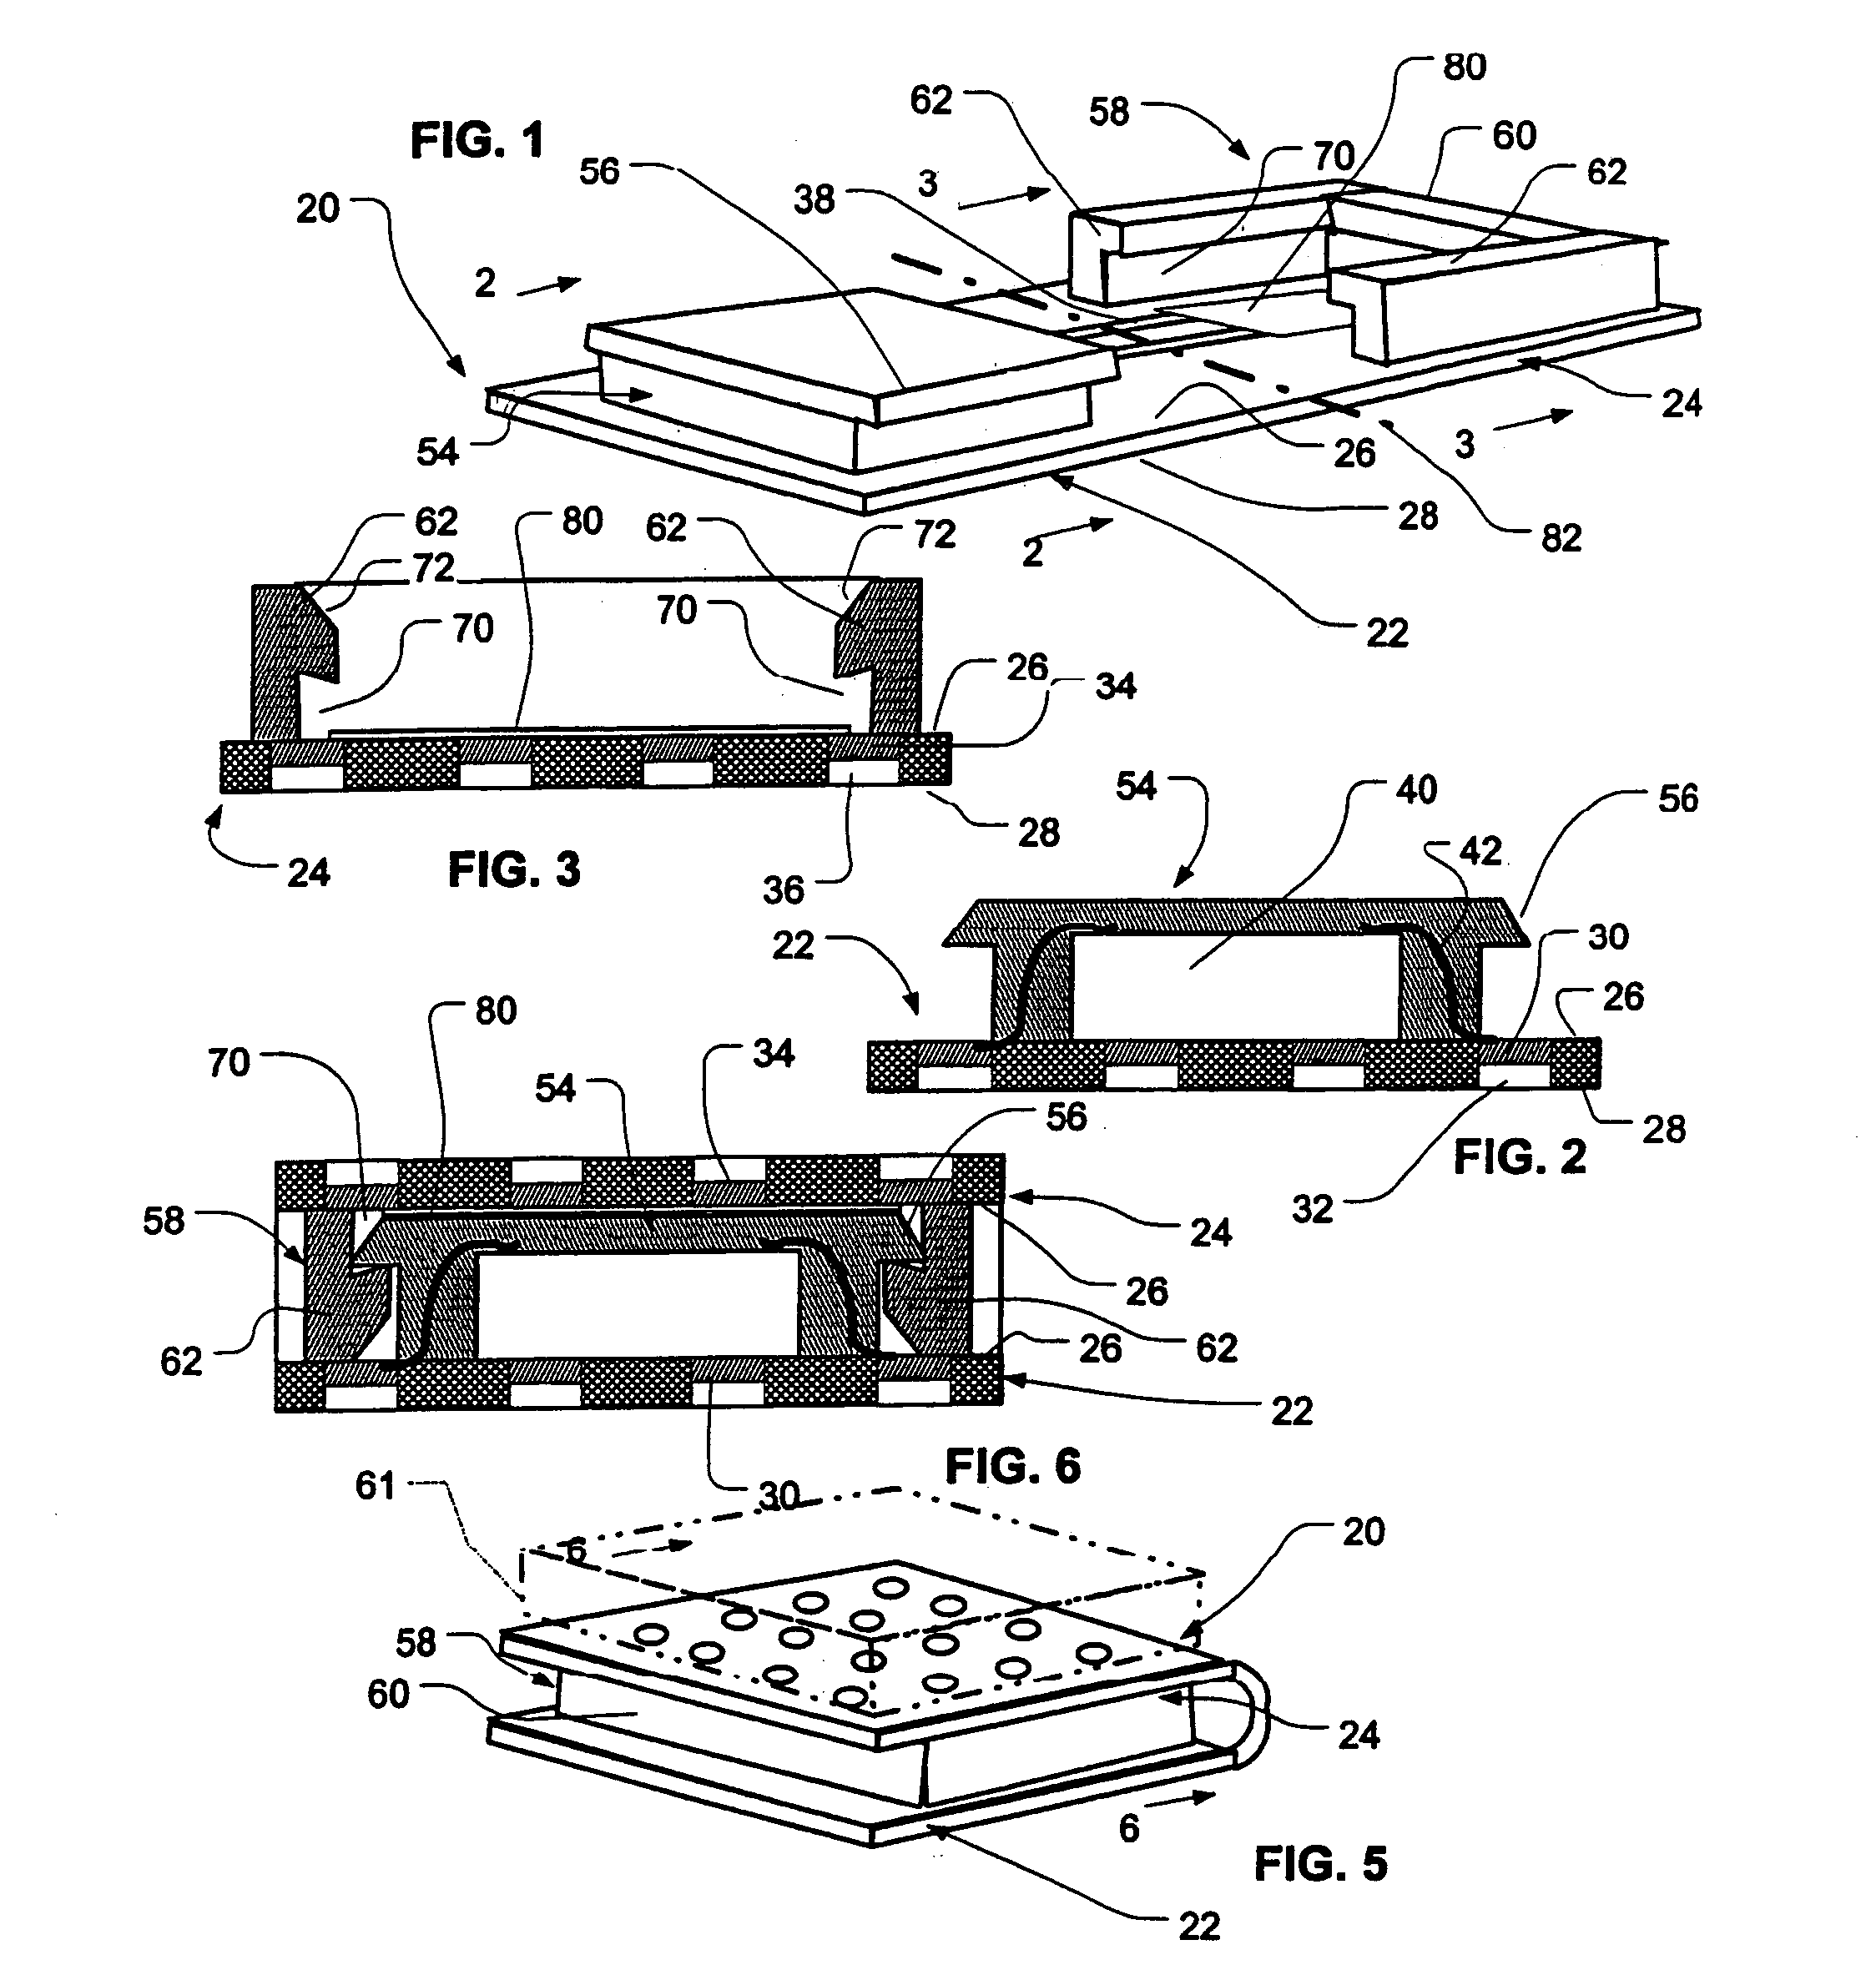 Microelectronic packages with self-aligning features